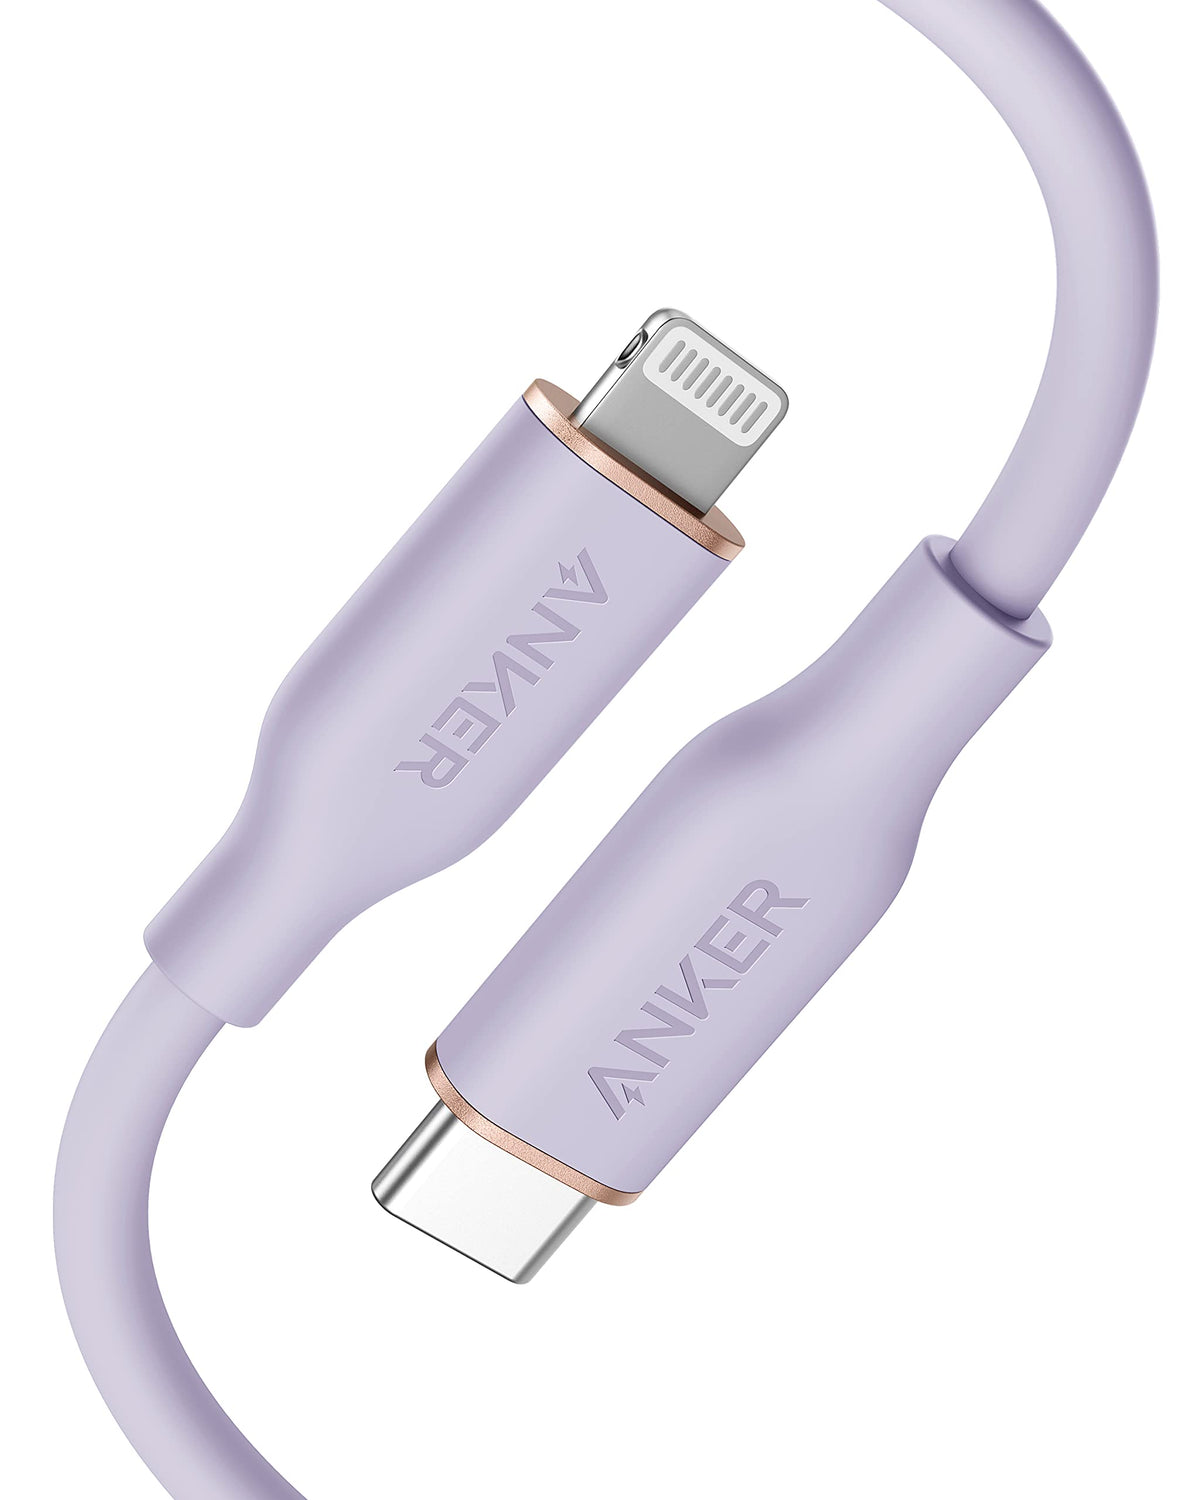 Anker &lt;b&gt;641&lt;/b&gt; USB-C to Lightning Cable (Flow, Silicone)